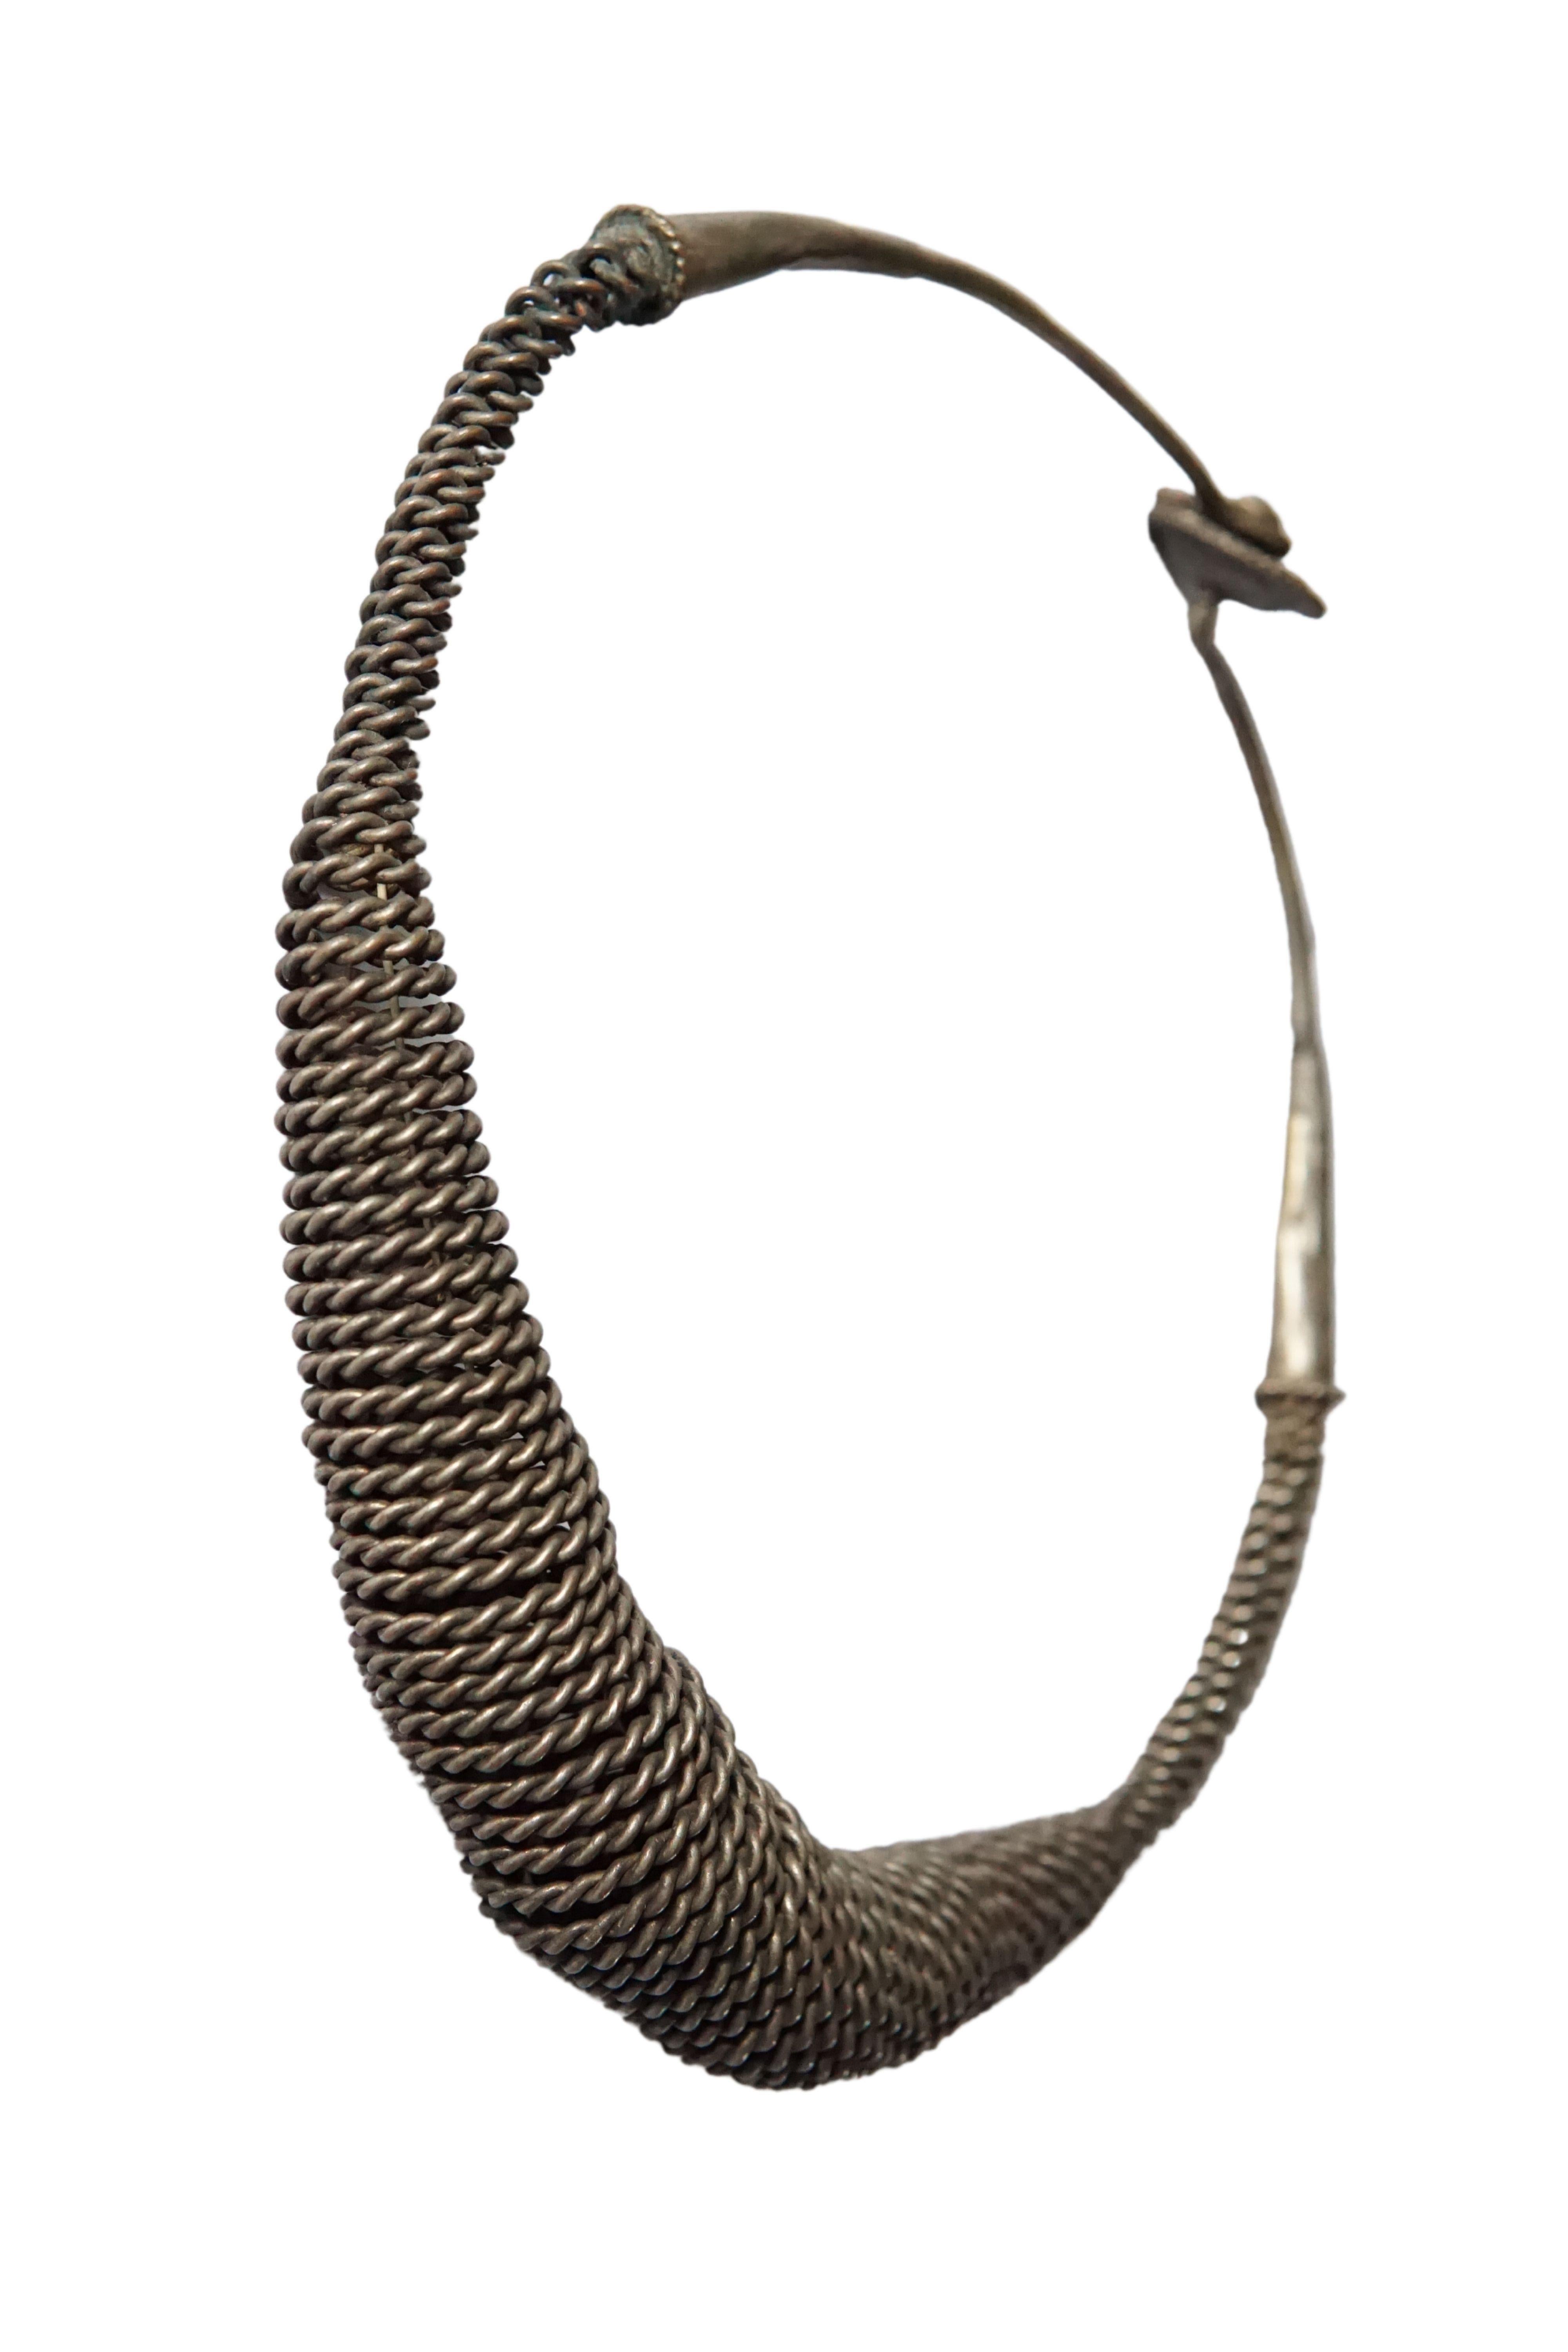 This 'Nifatali-tali' necklace is a type of necklace worn by the people of Northern Nias Island, North Sumatra. This necklace is equally worn by men and women of the noble class, si'ulu. The craftmanship, thickness, as well as composition of the